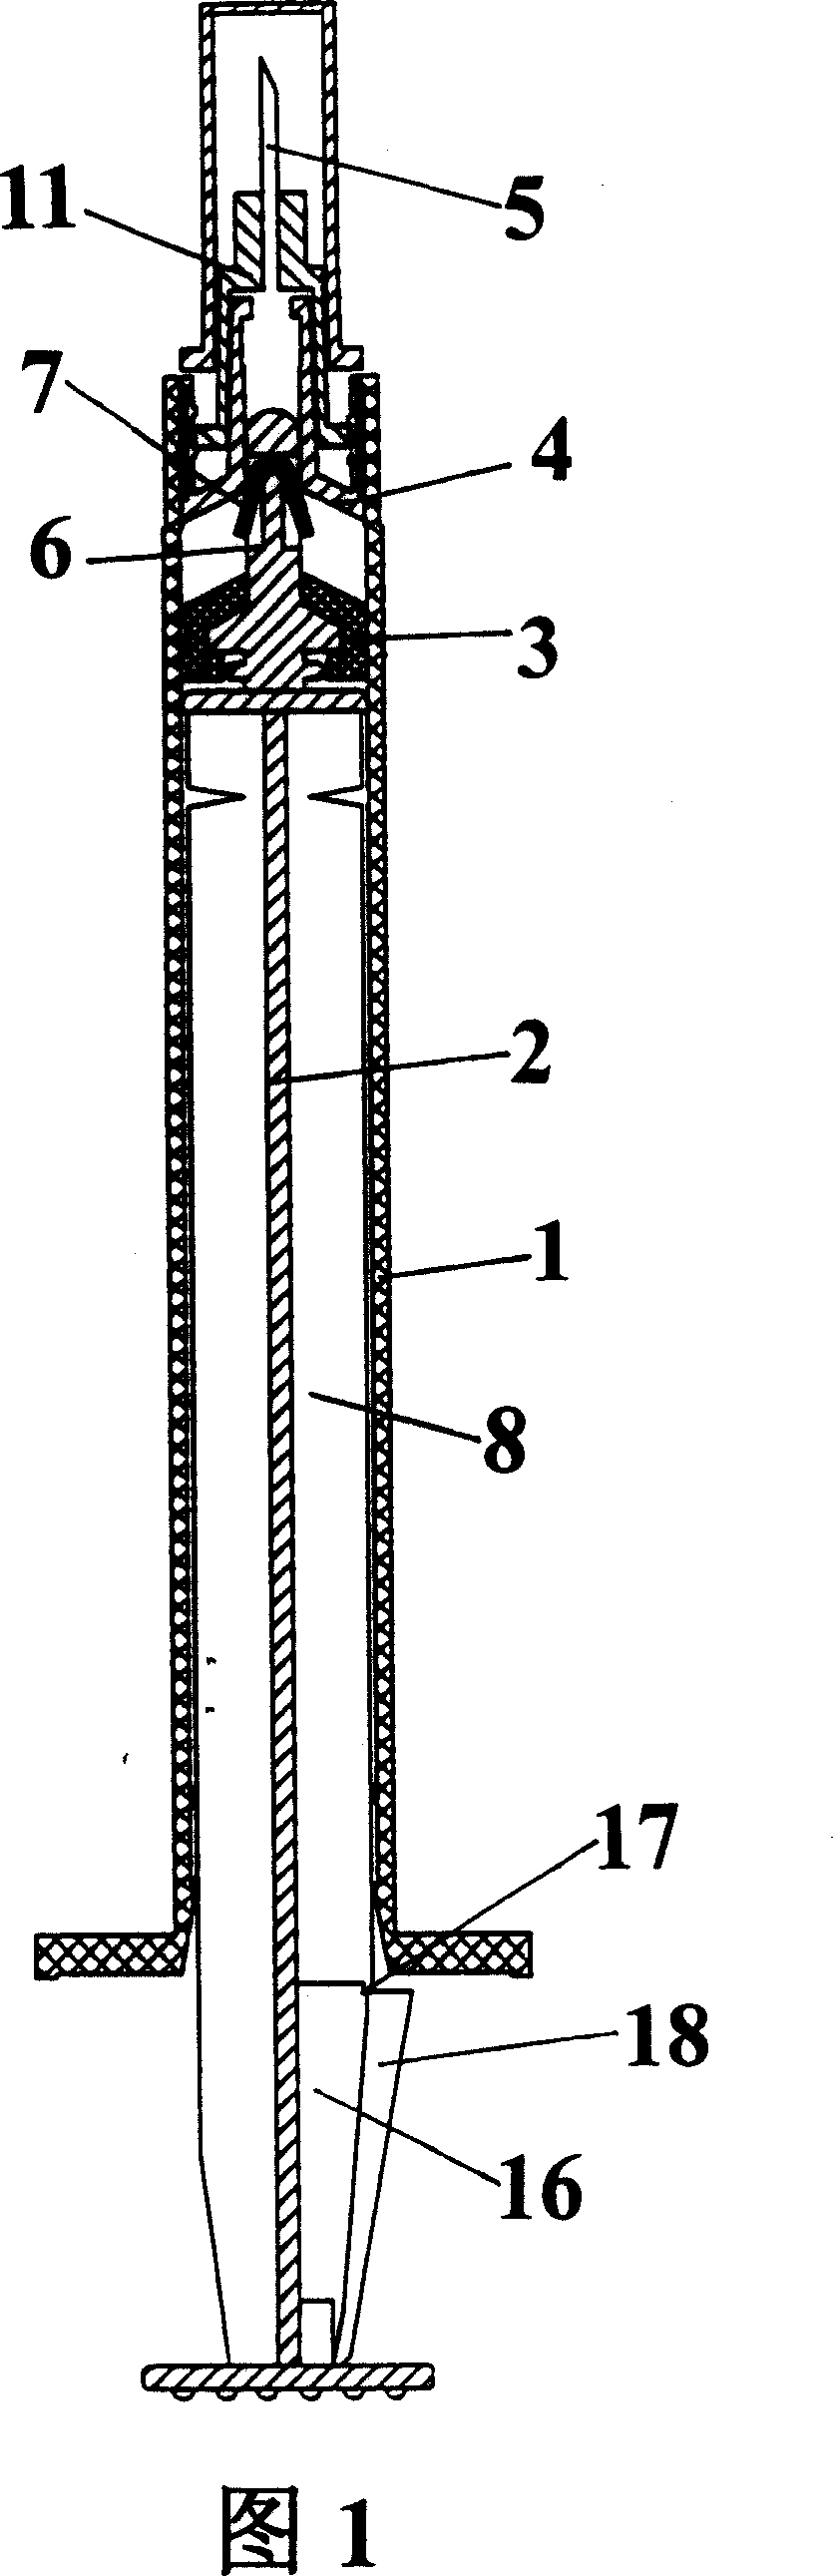 A safe self-destruction syringes with exchangeable needle